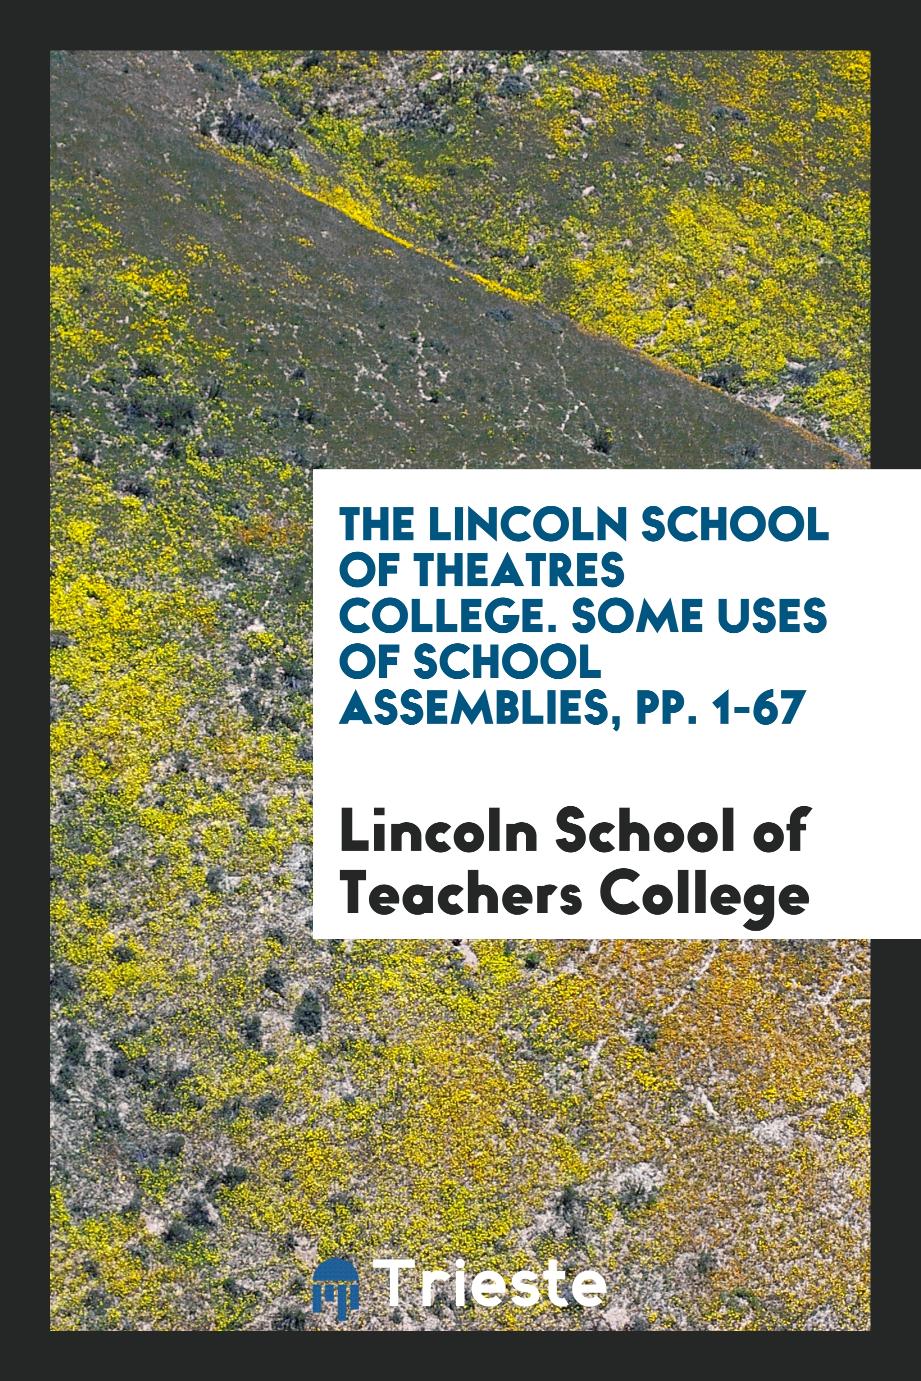 The Lincoln School of Theatres College. Some Uses of School Assemblies, pp. 1-67